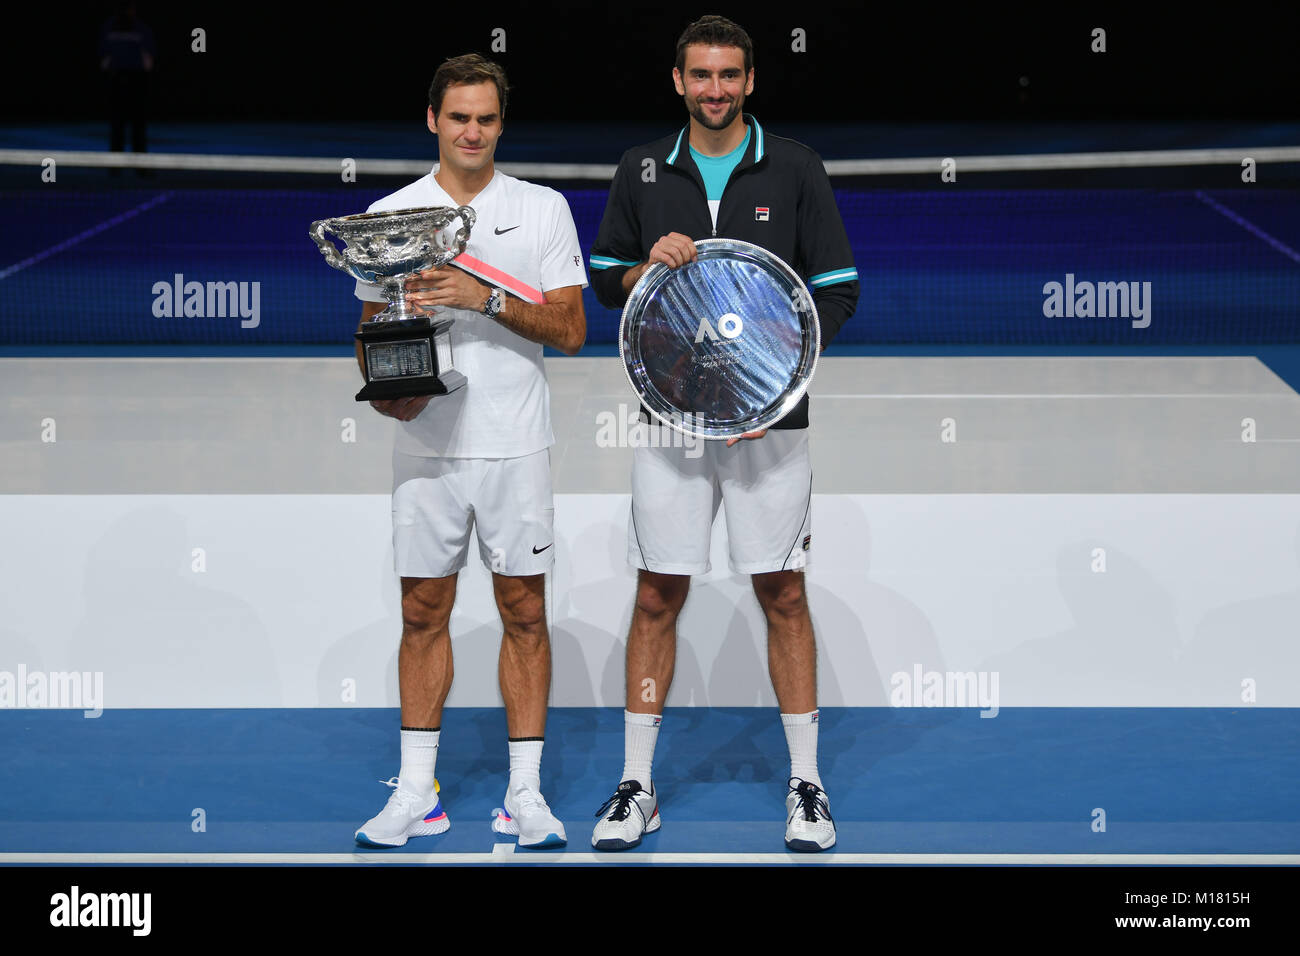 Melbourne, Australia. 28th Jan, 2018. Number two seed Roger Federer of Switzerland and number six seed Marin Cilic of Croatia pose for photographs after Federer won the Men's Final against on day fourteen of the 2018 Australian Open Grand Slam tennis tournament in Melbourne, Australia. Federer won 3 sets to 2. Sydney Low/Cal Sport Media/Alamy Live News Stock Photo